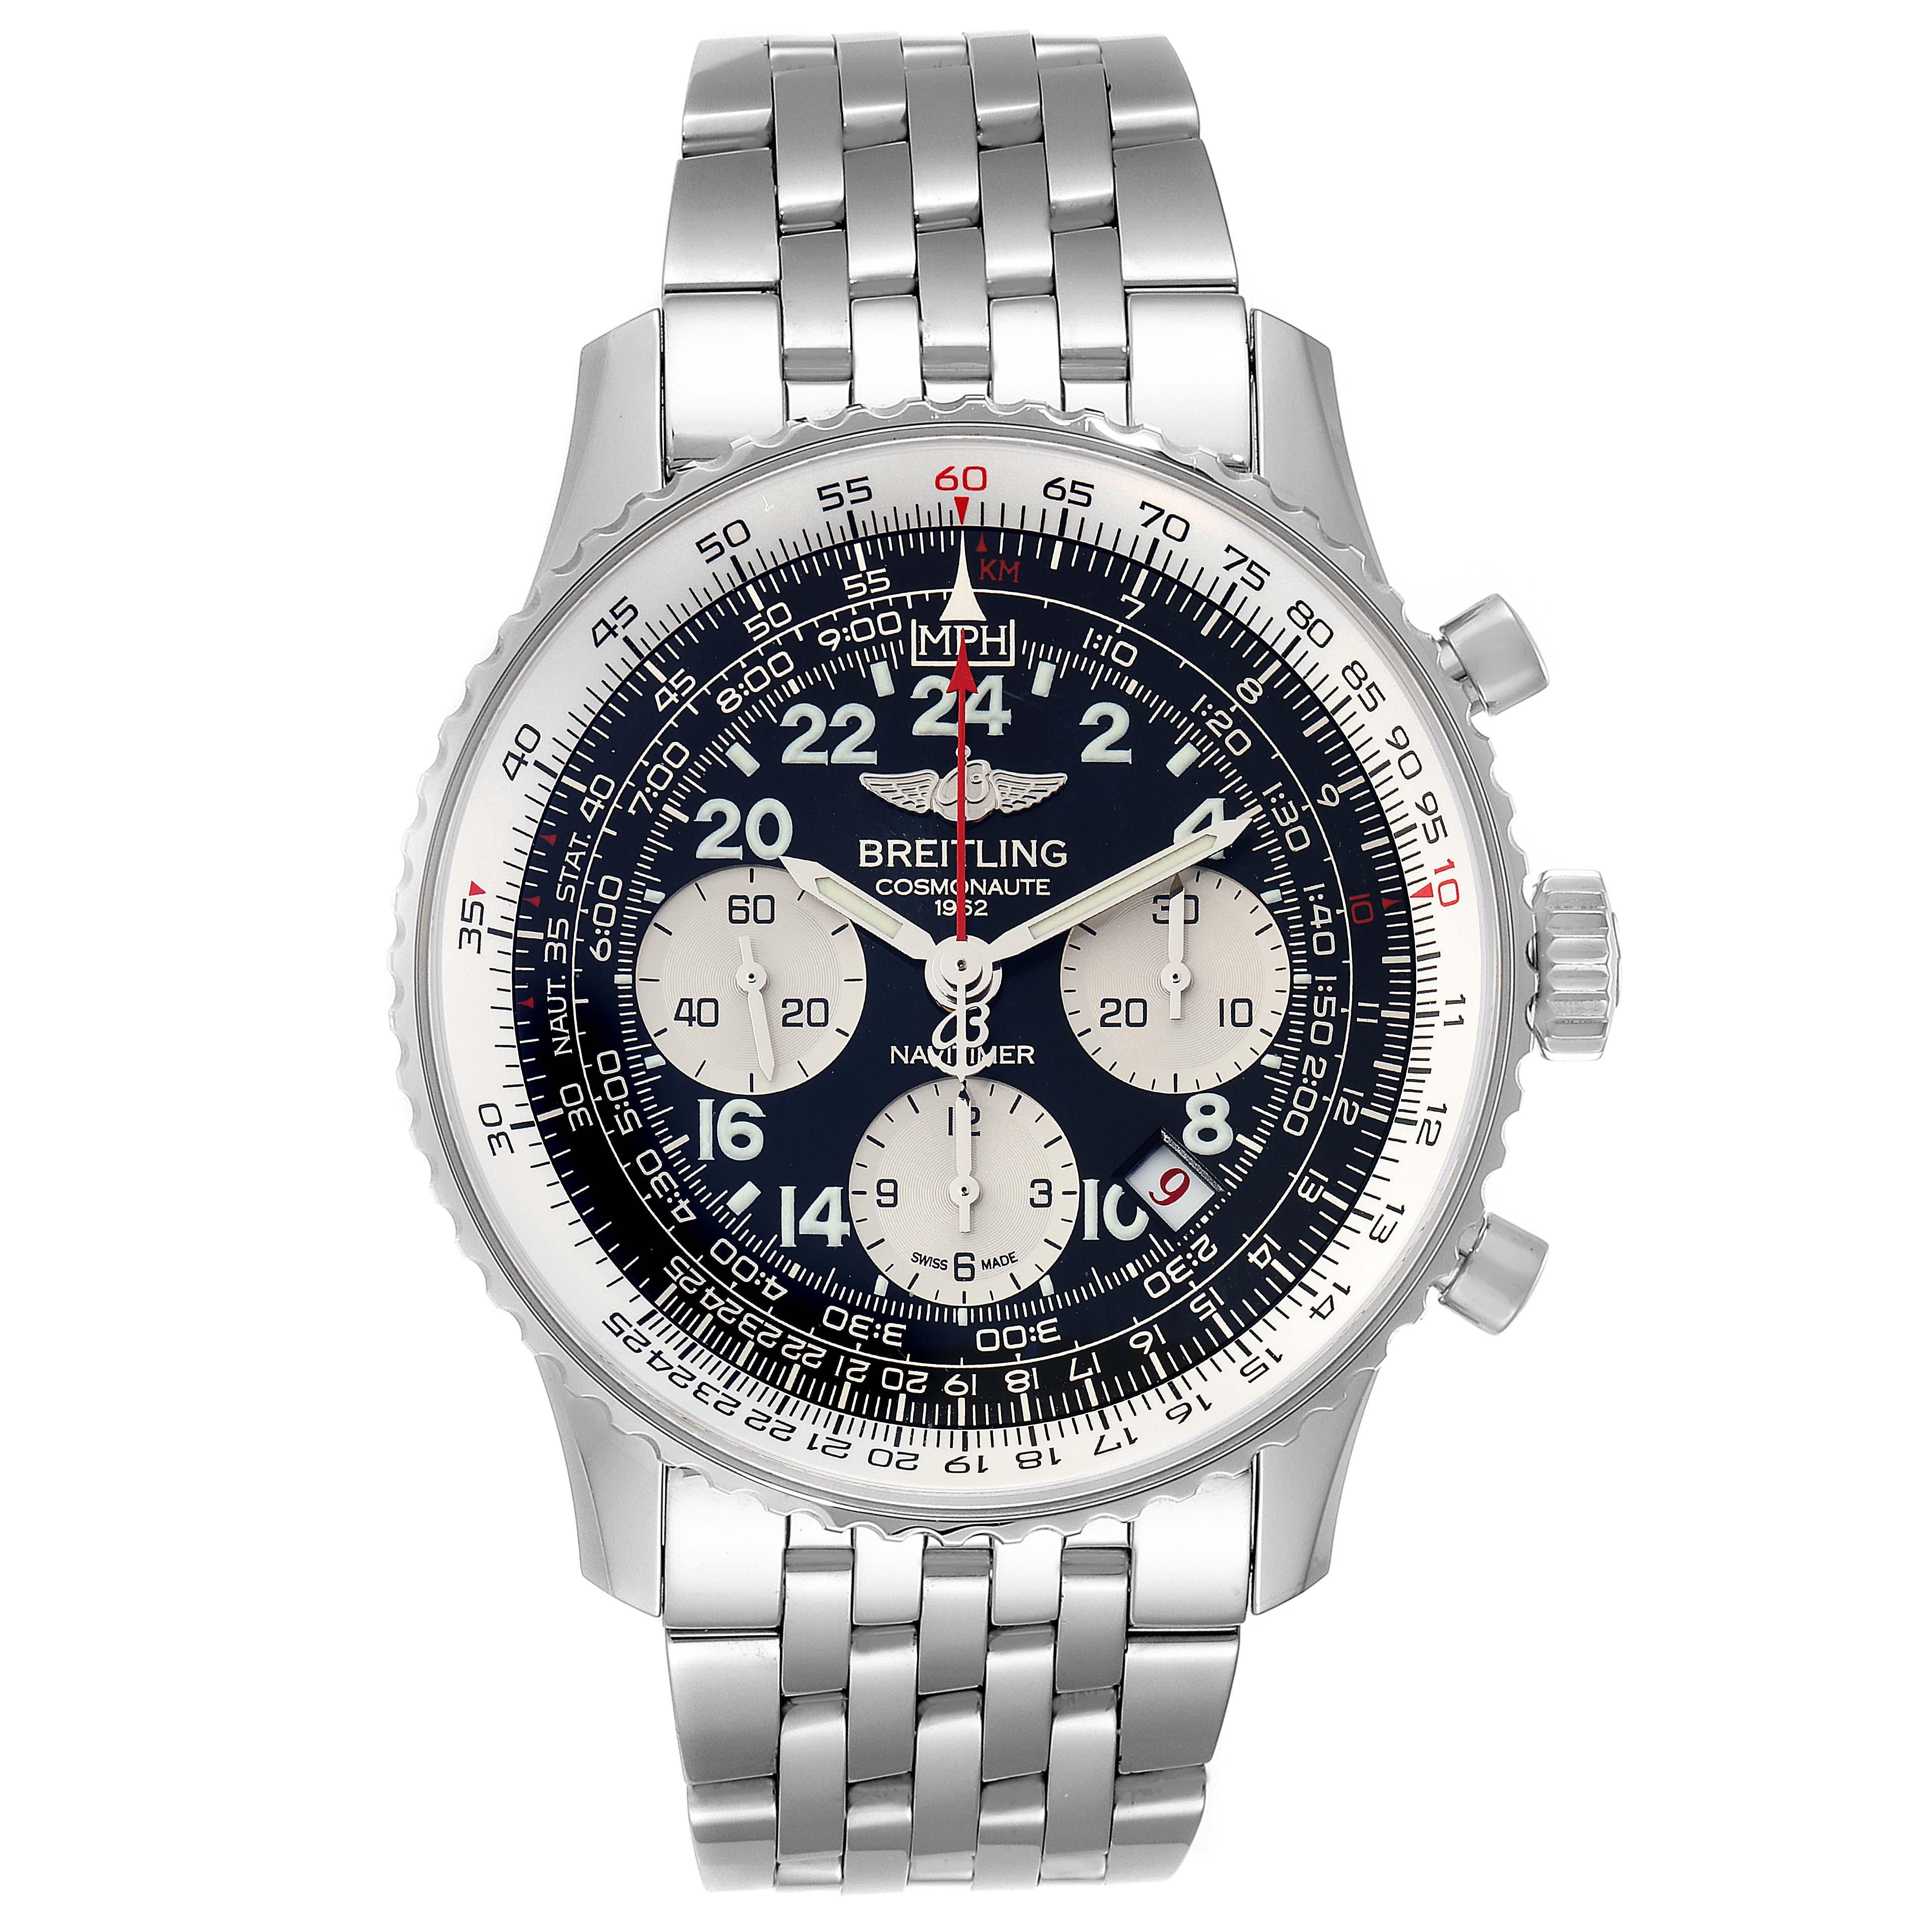 Breitling Navitimer Cosmonaute 02 Limited Edition Watch AB0210 Box Papers. Automatic self-winding officially certified chronometer movement. Chronograph function. Stainless steel case 43.0 mm in diameter. Signed Aurora 7 Caseback. Stainless steel